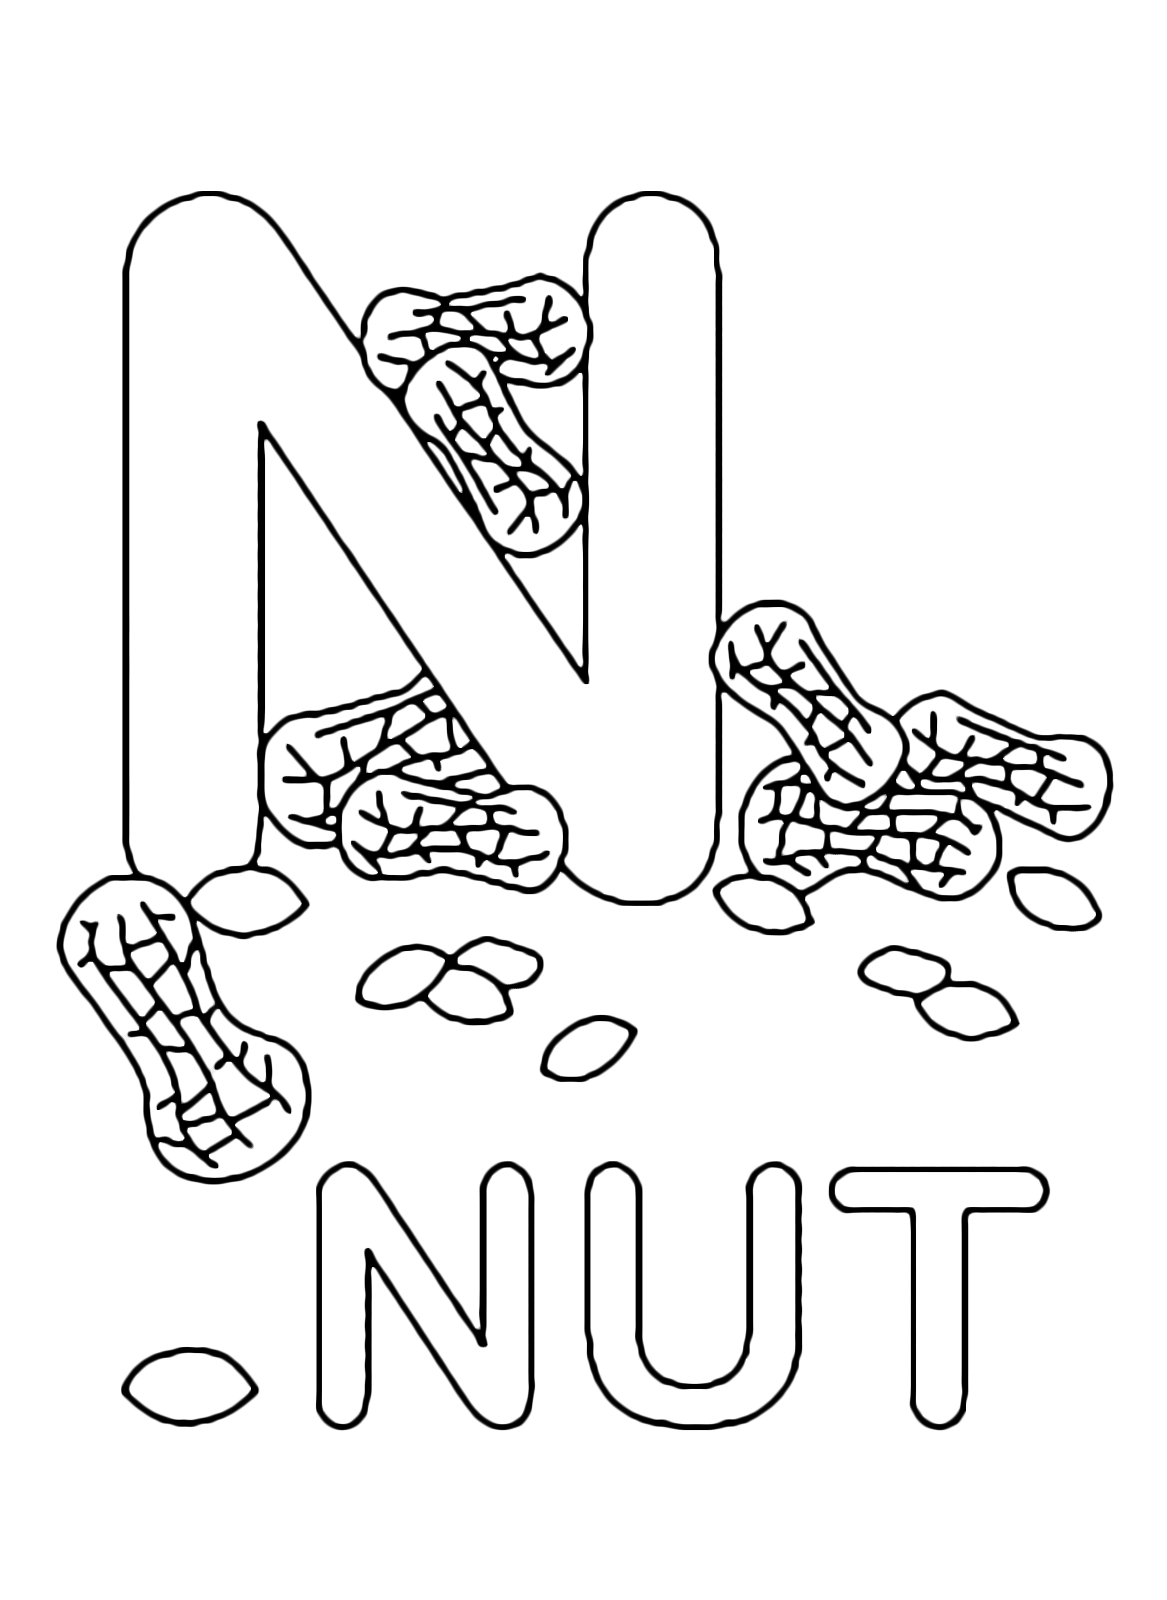 Letters and numbers - N for nut uppercase letter